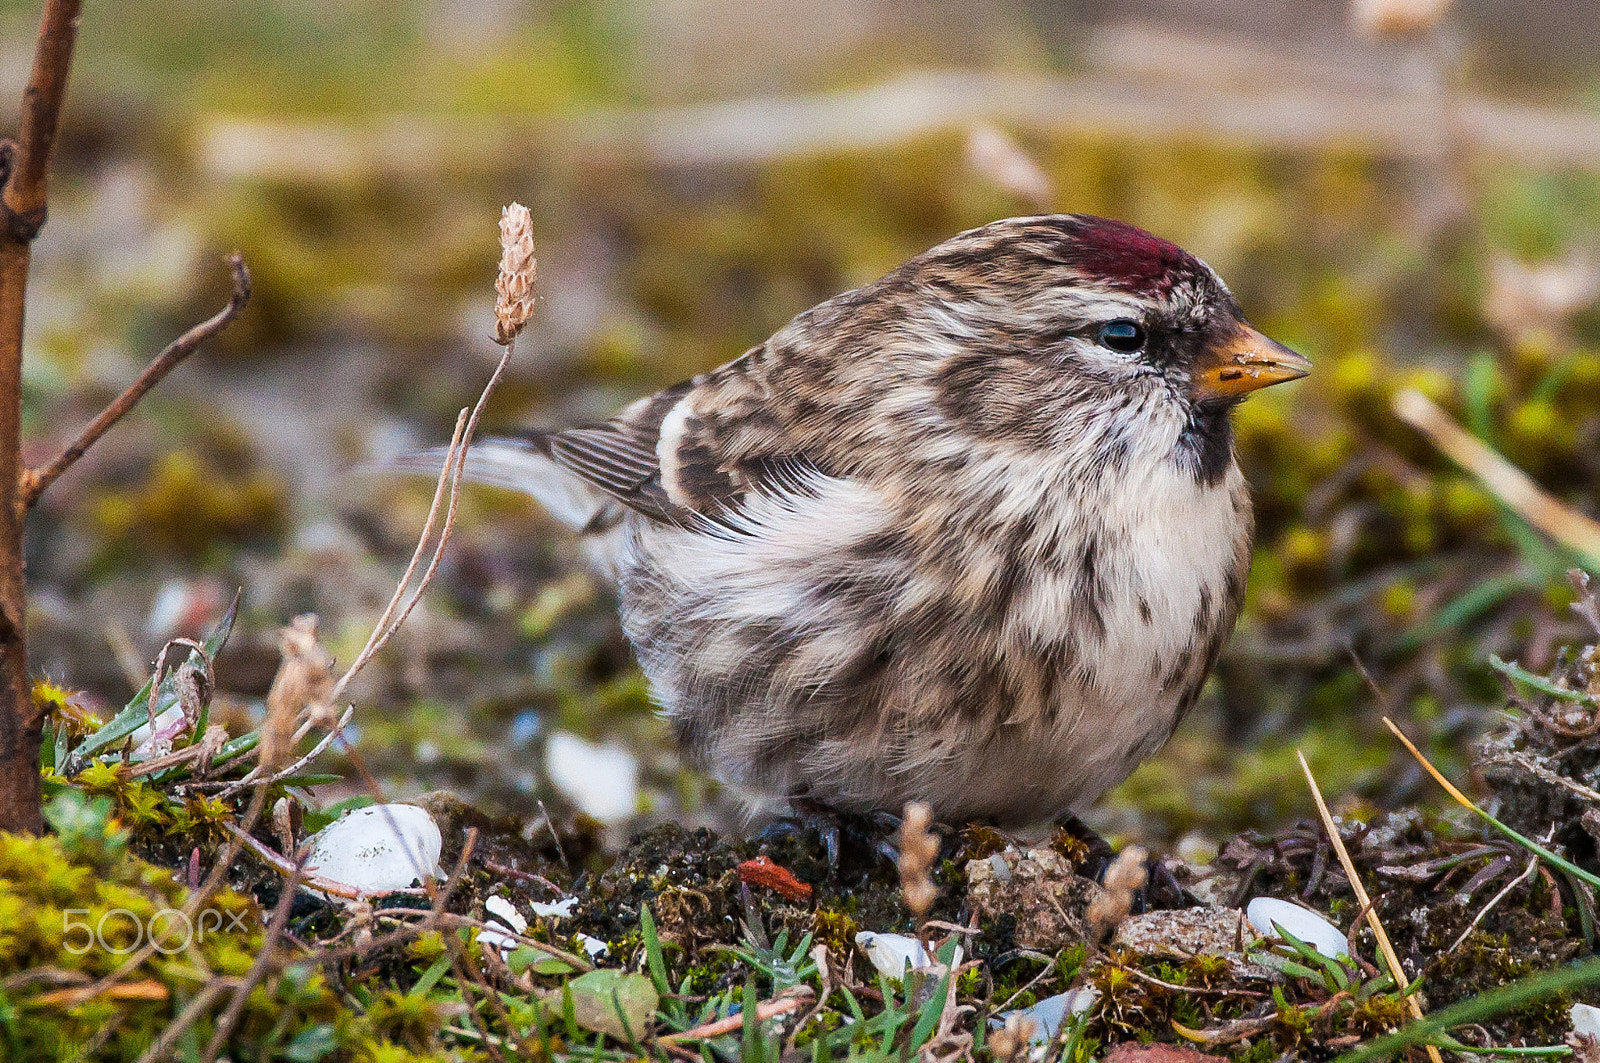 Nikon D90 + Sigma 150-600mm F5-6.3 DG OS HSM | C sample photo. Mealy redpoll / grote barmsijs photography